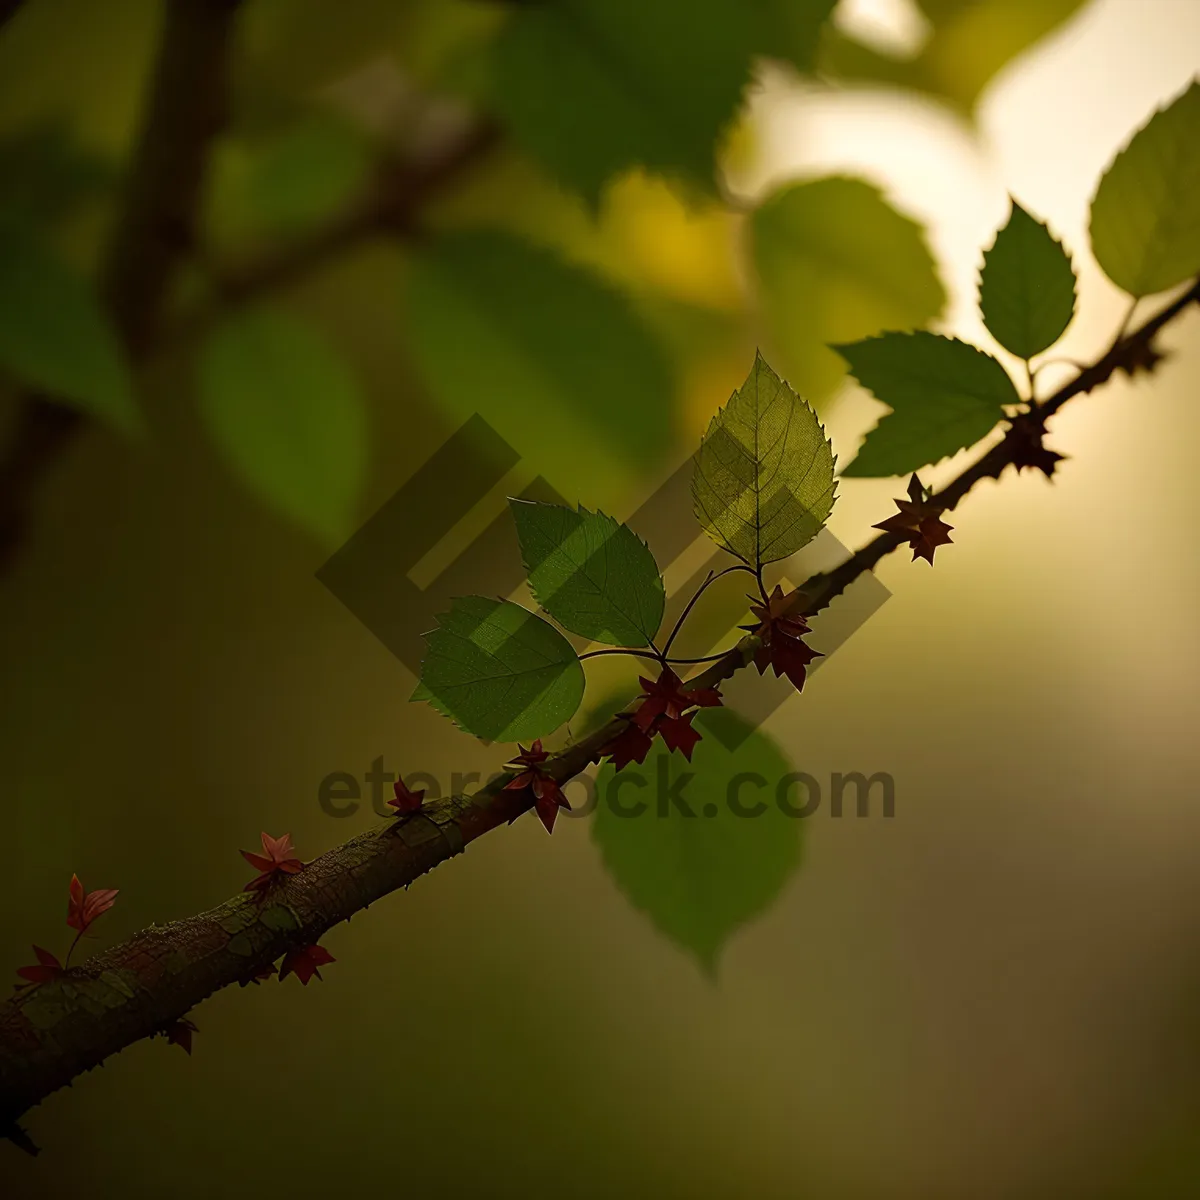 Picture of Sunlit Elm Tree Branch in Summer Forest